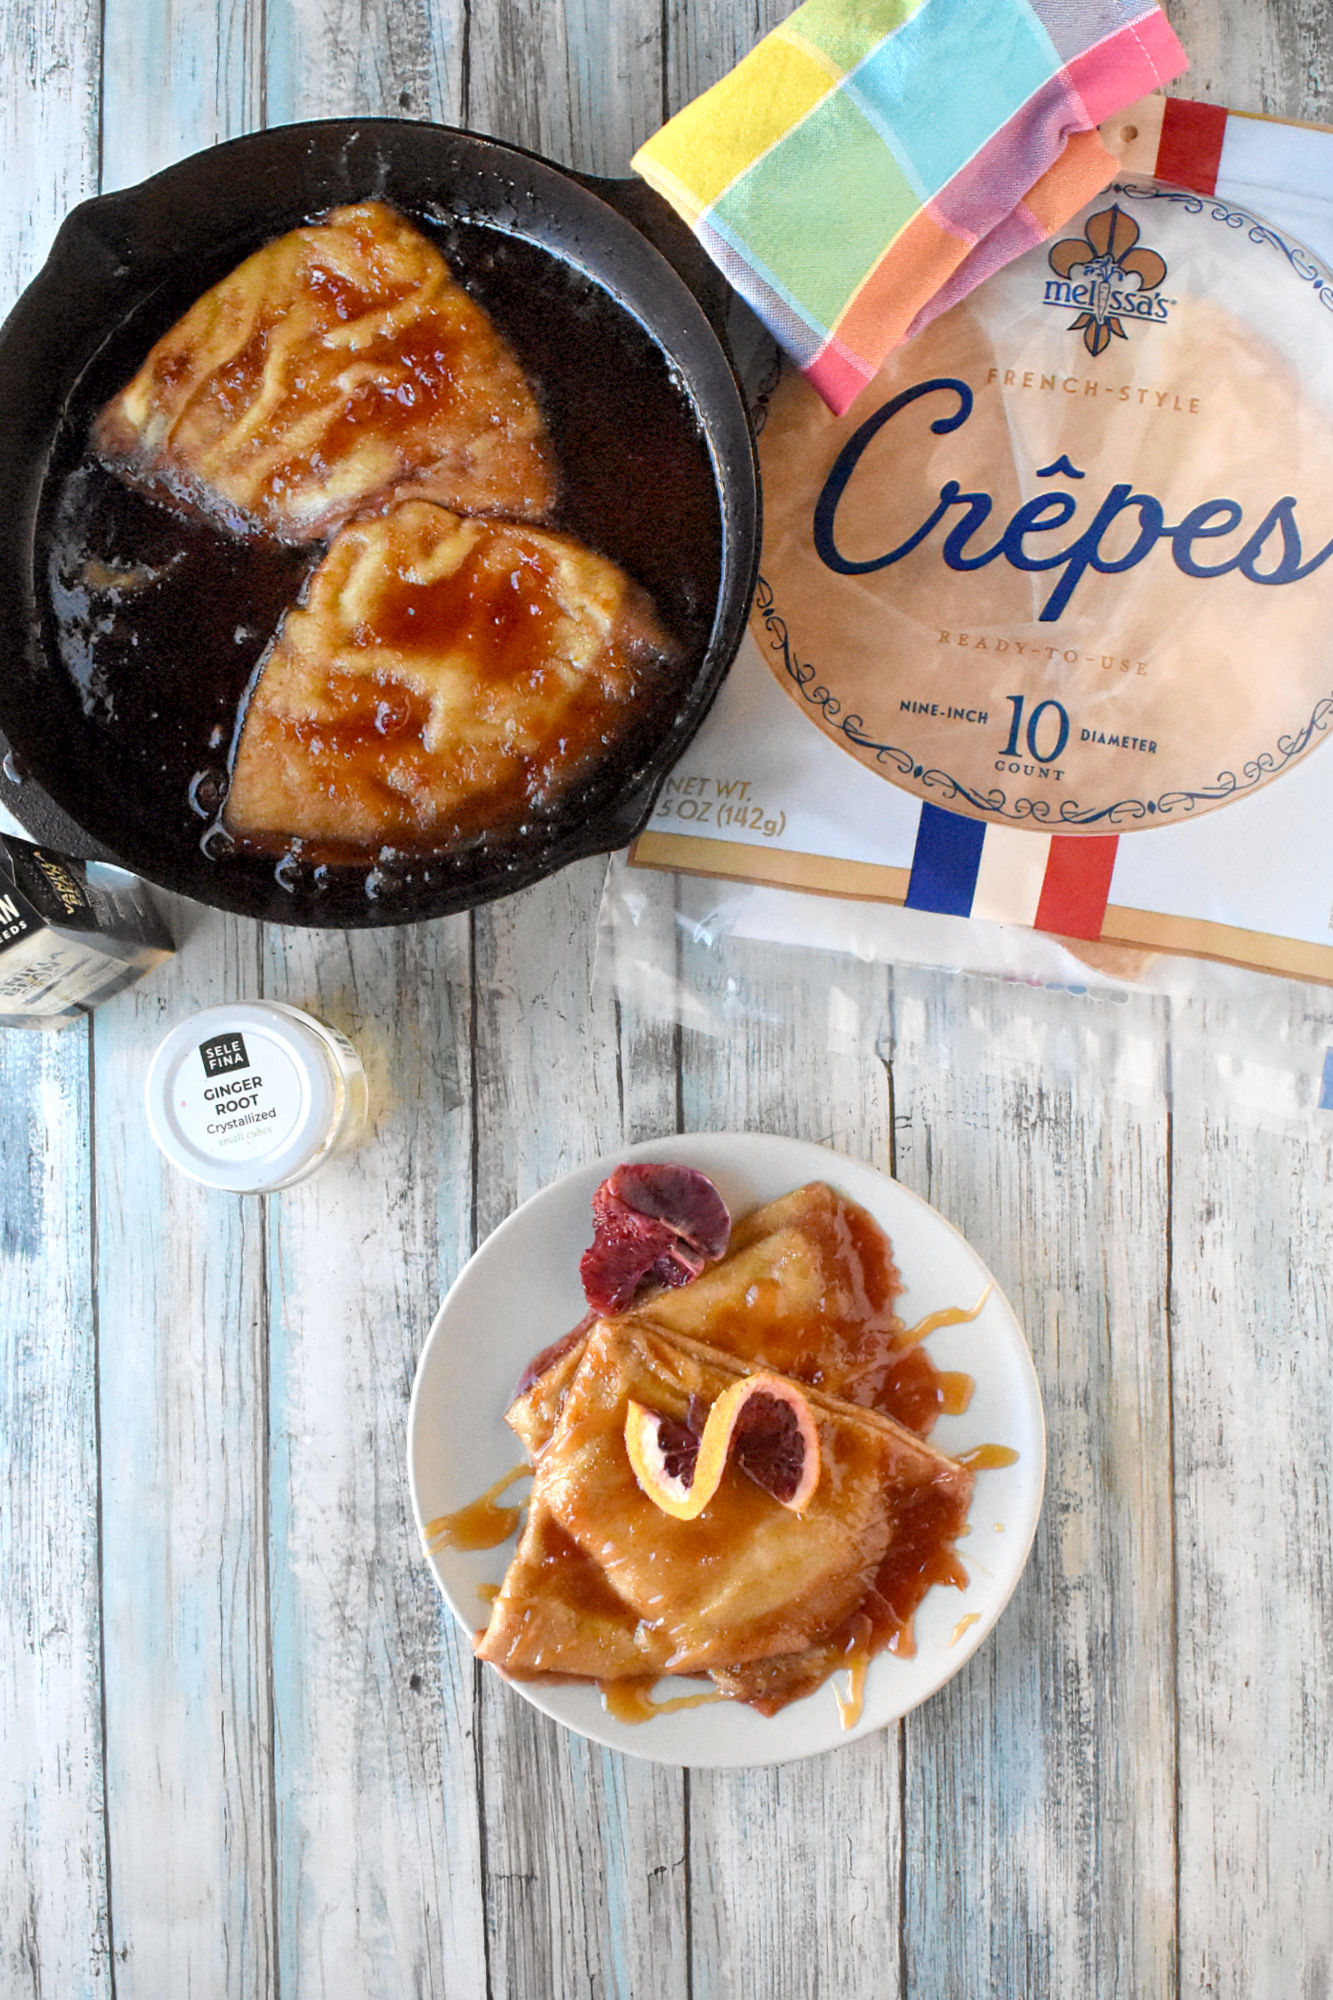 Satisfy your sweet tooth with the ultimate indulgence - #BloodOrange Crepe Suzette! A citrus twist on a classic dessert that is sure to brighten up your day.  #SpringSweetsWeek #dessertlover #foodie #CitrusCreations #SweetAndTangy #FruitDesserts #FrenchInspiredTreats #FlamingCrepes
